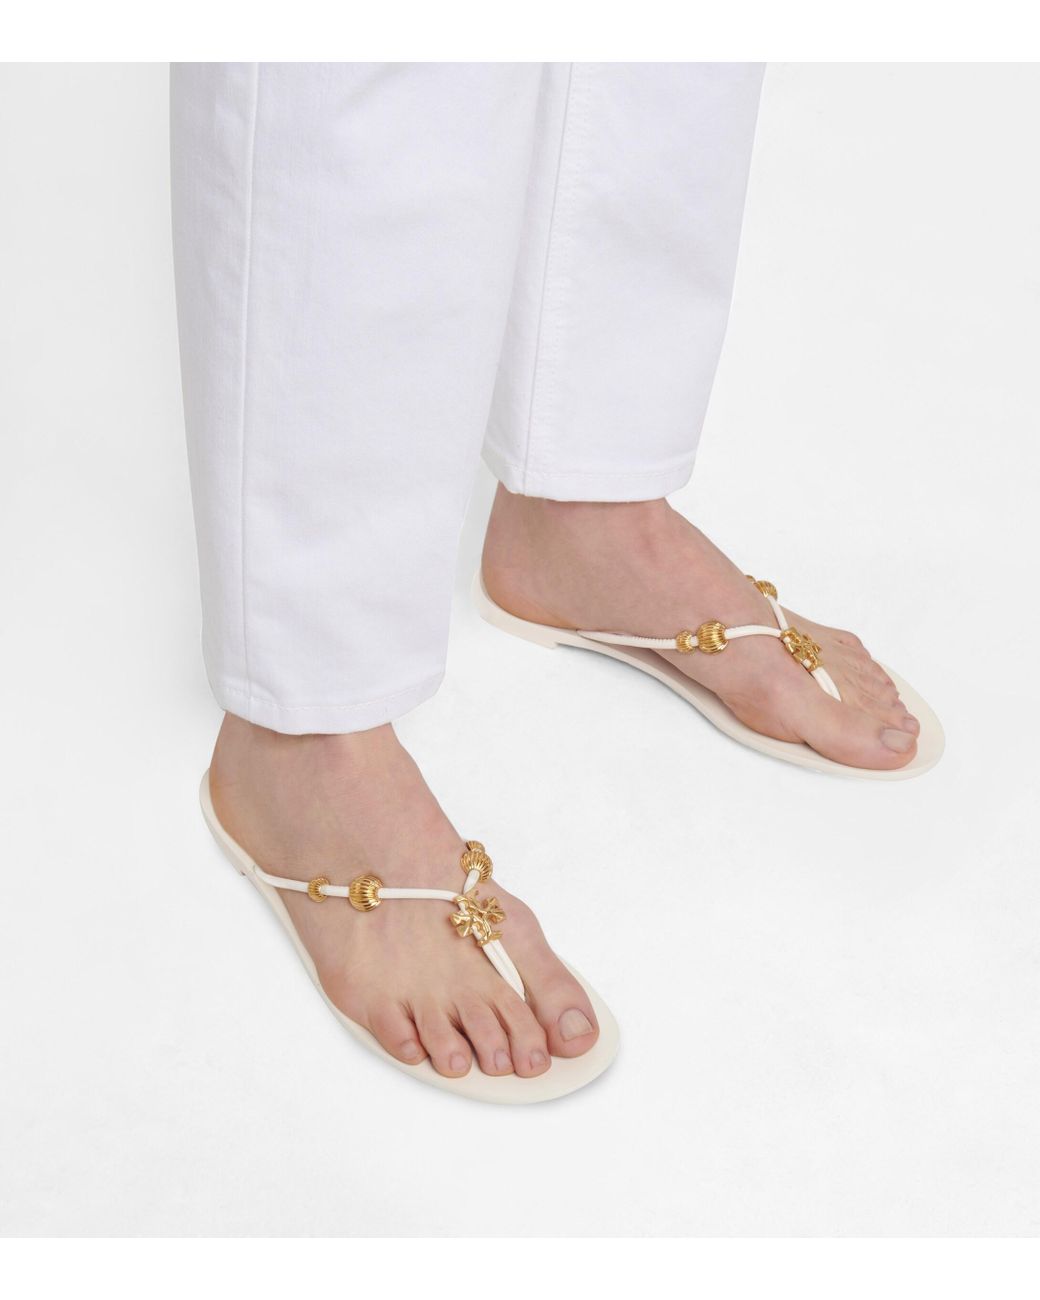 Tory Burch Capri Leather Thong Sandals in White | Lyst UK